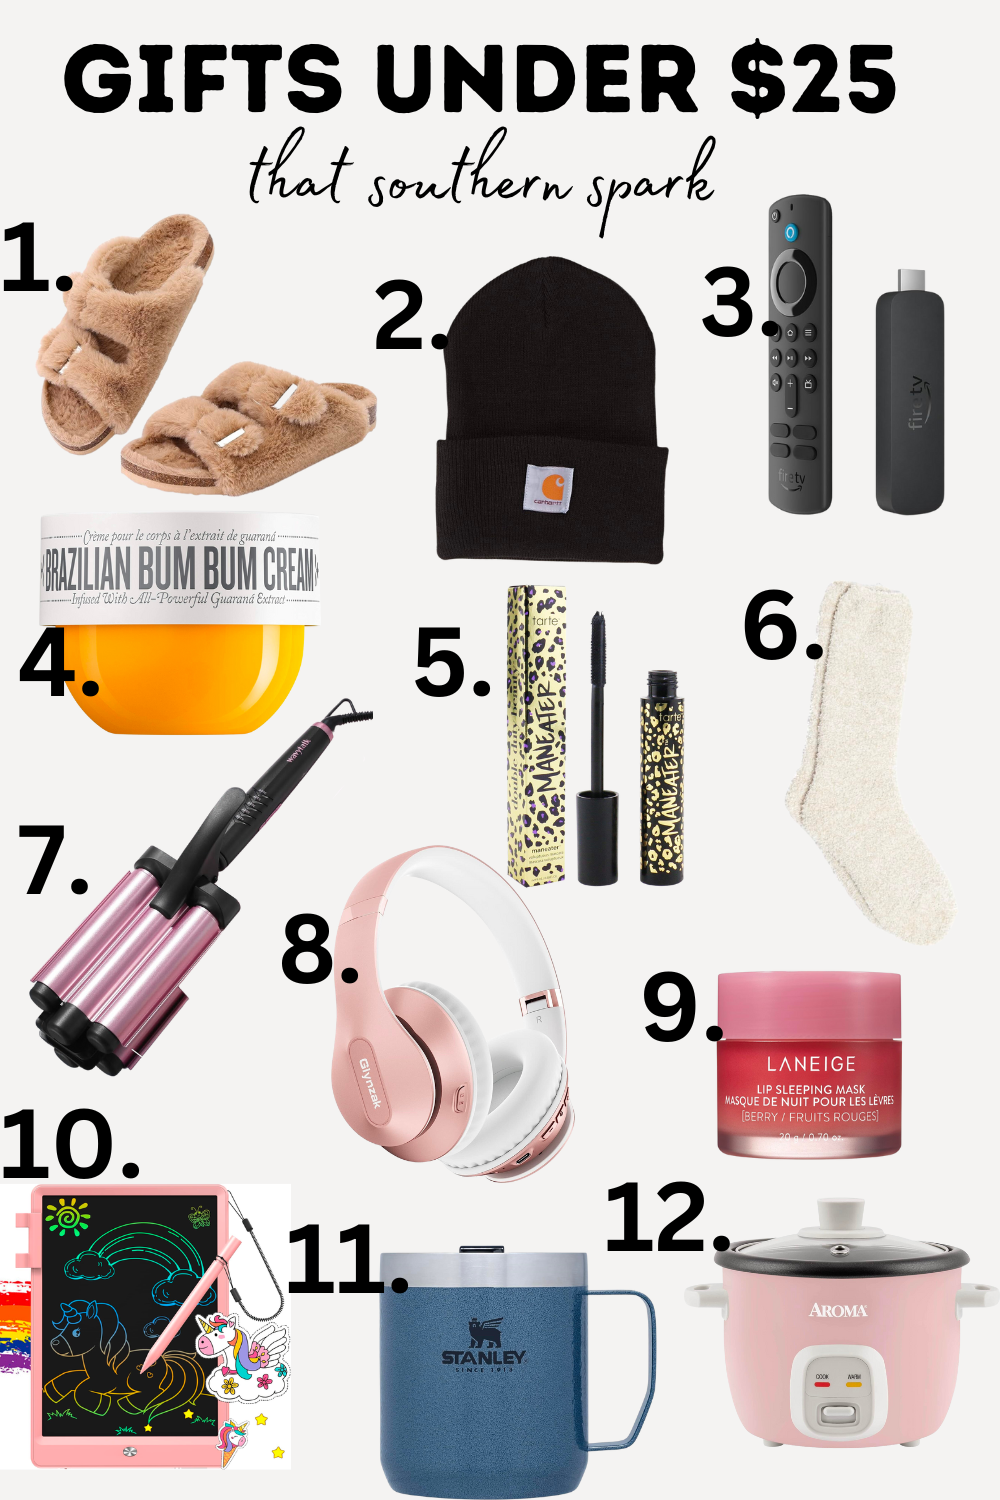 CHRISTMAS GIFTS UNDER $25